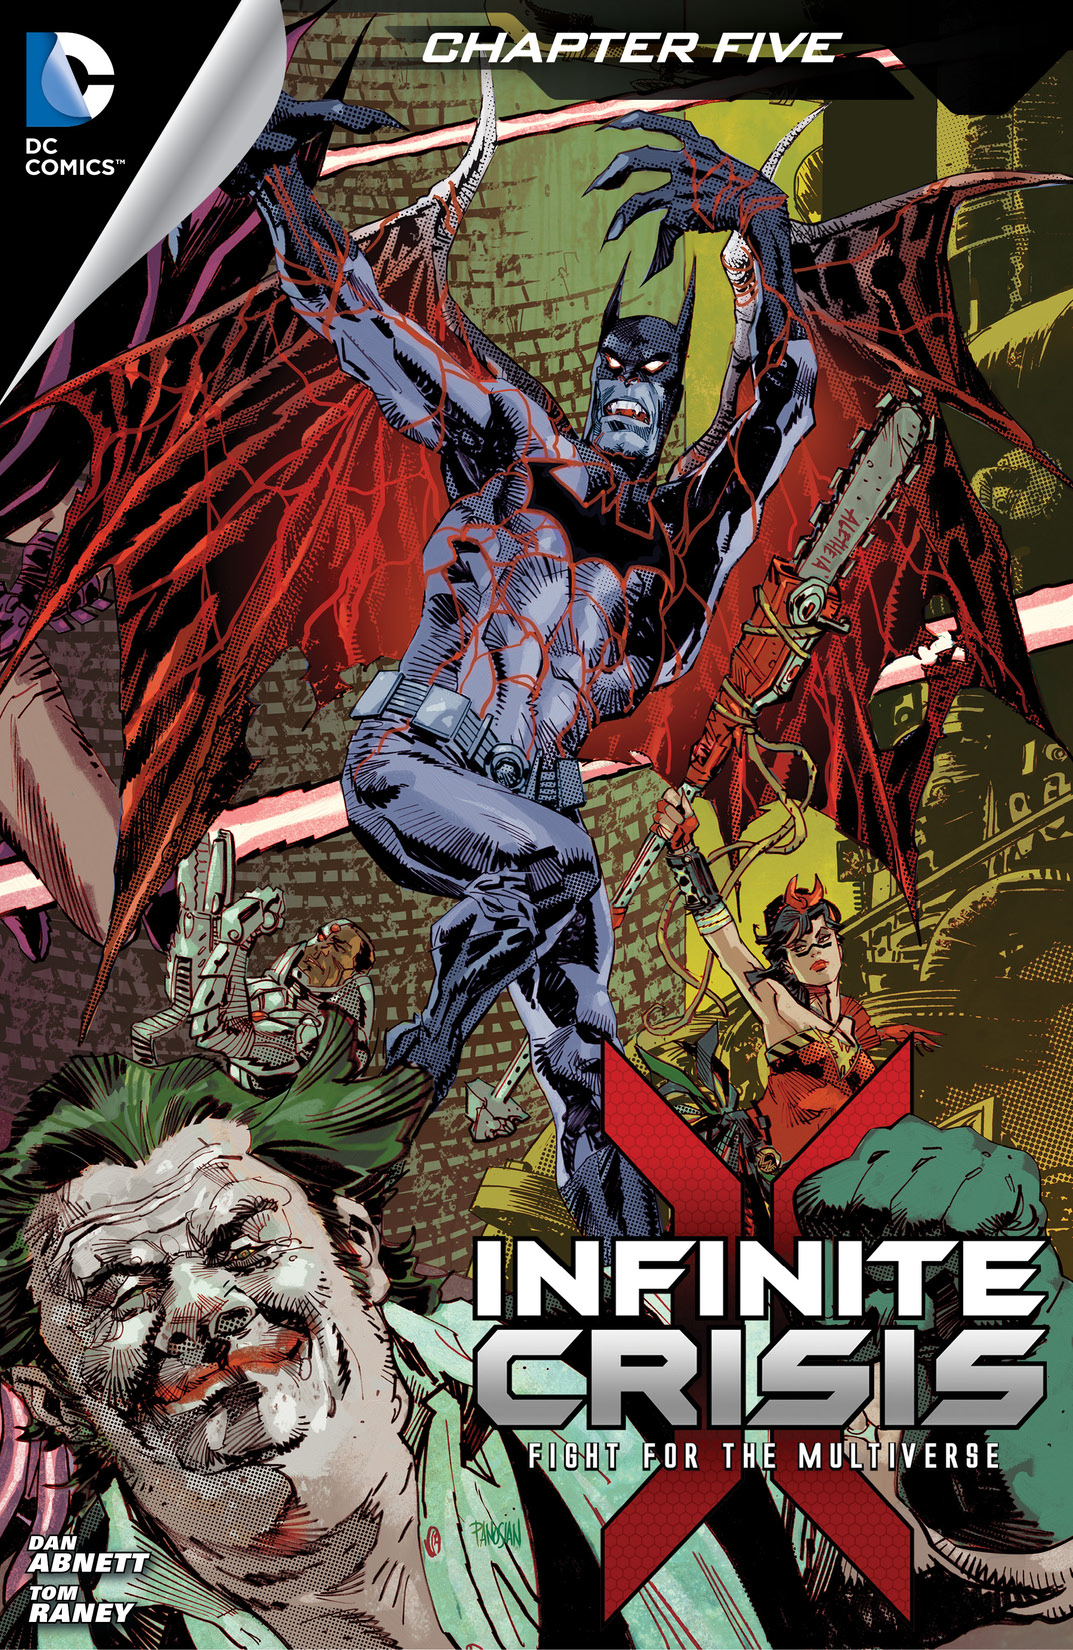 Infinite Crisis: Fight for the Multiverse #5 preview images